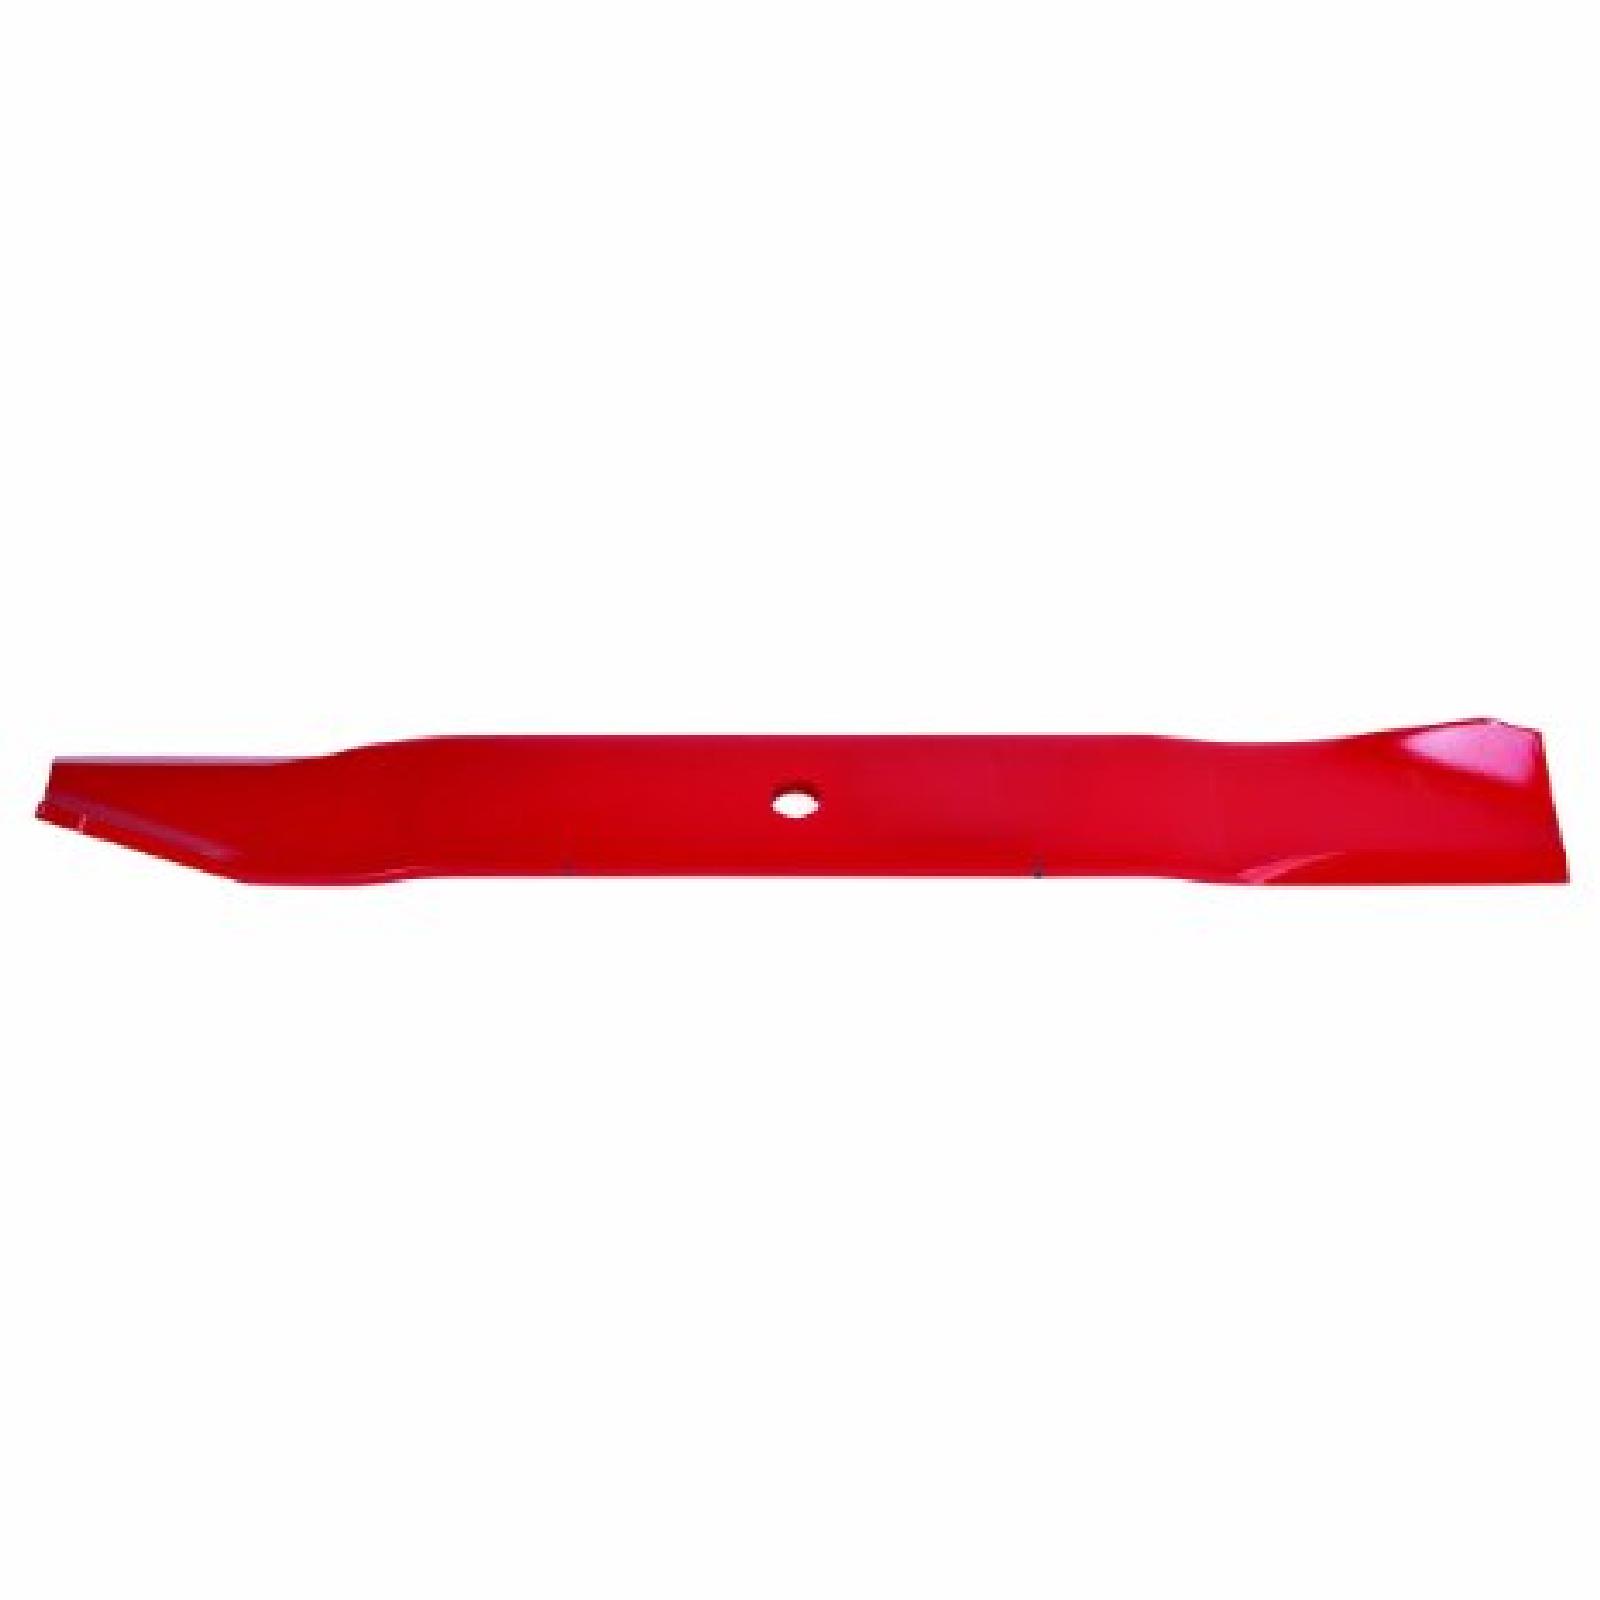 BLADE, TORO 69 6920, 20IN part# 94-029 by Oregon